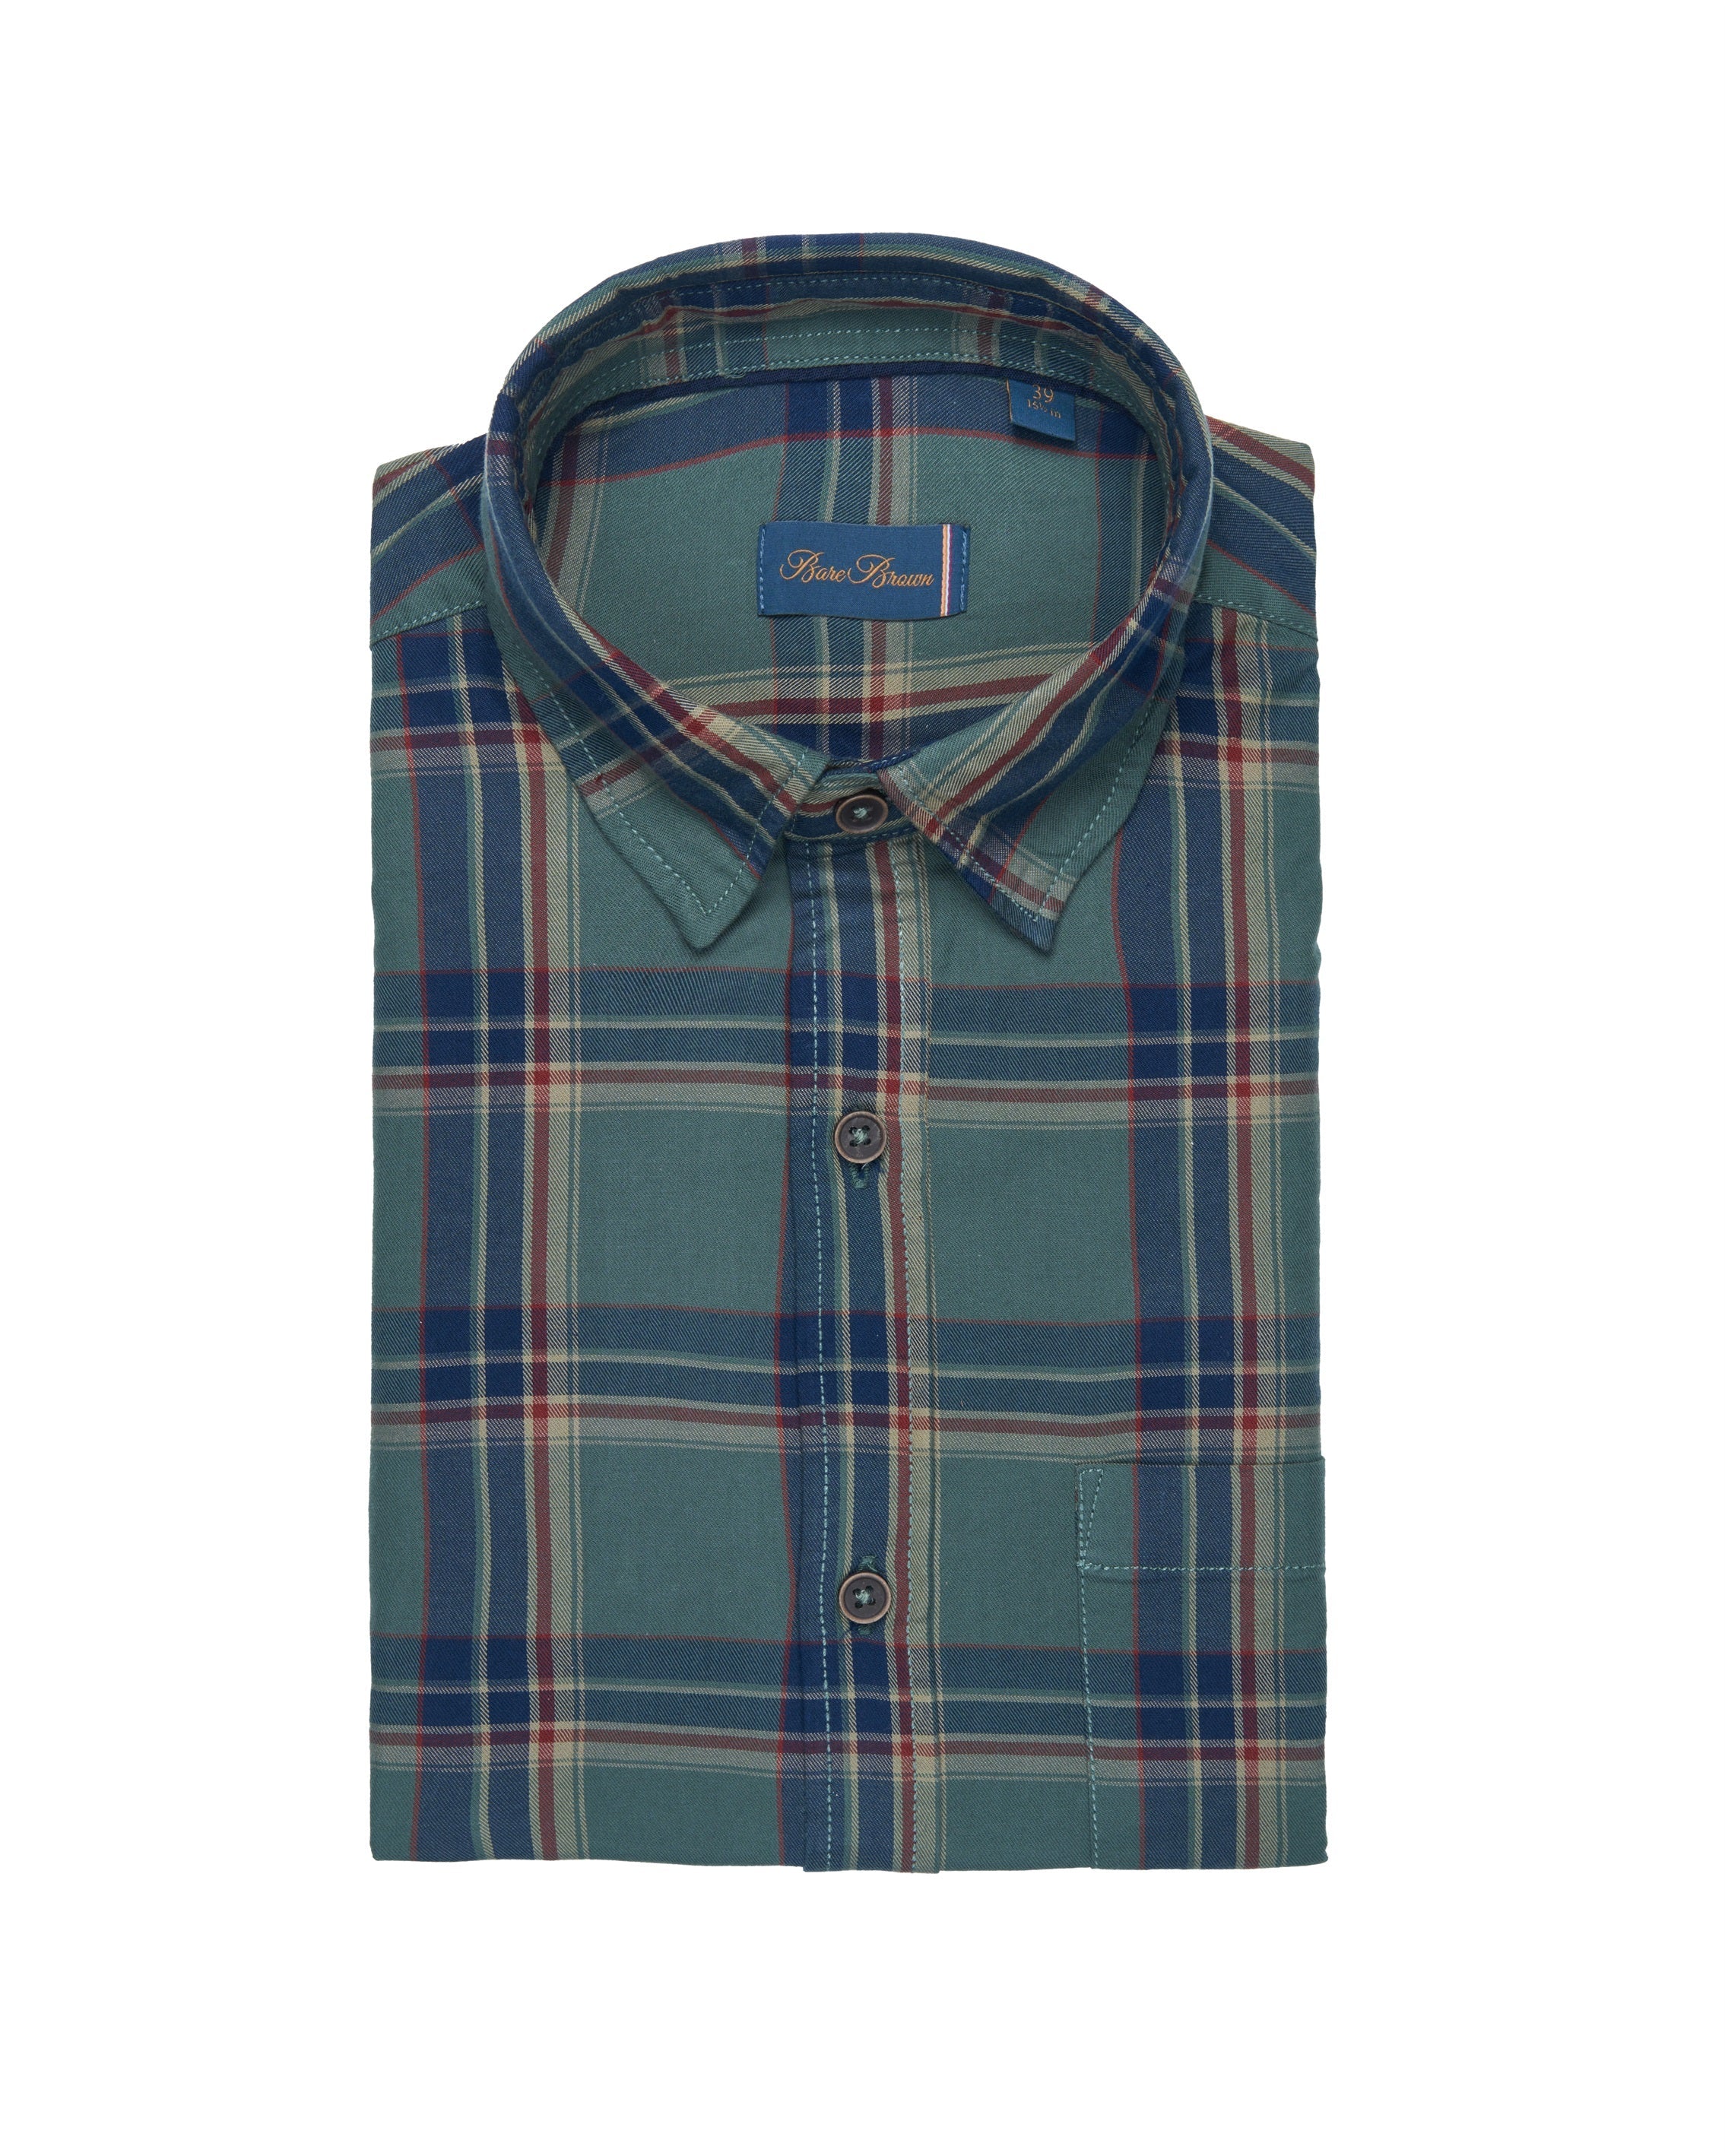 Bare Brown Cotton Check Shirt, Slim Fit with Full Sleeves - Olive Green